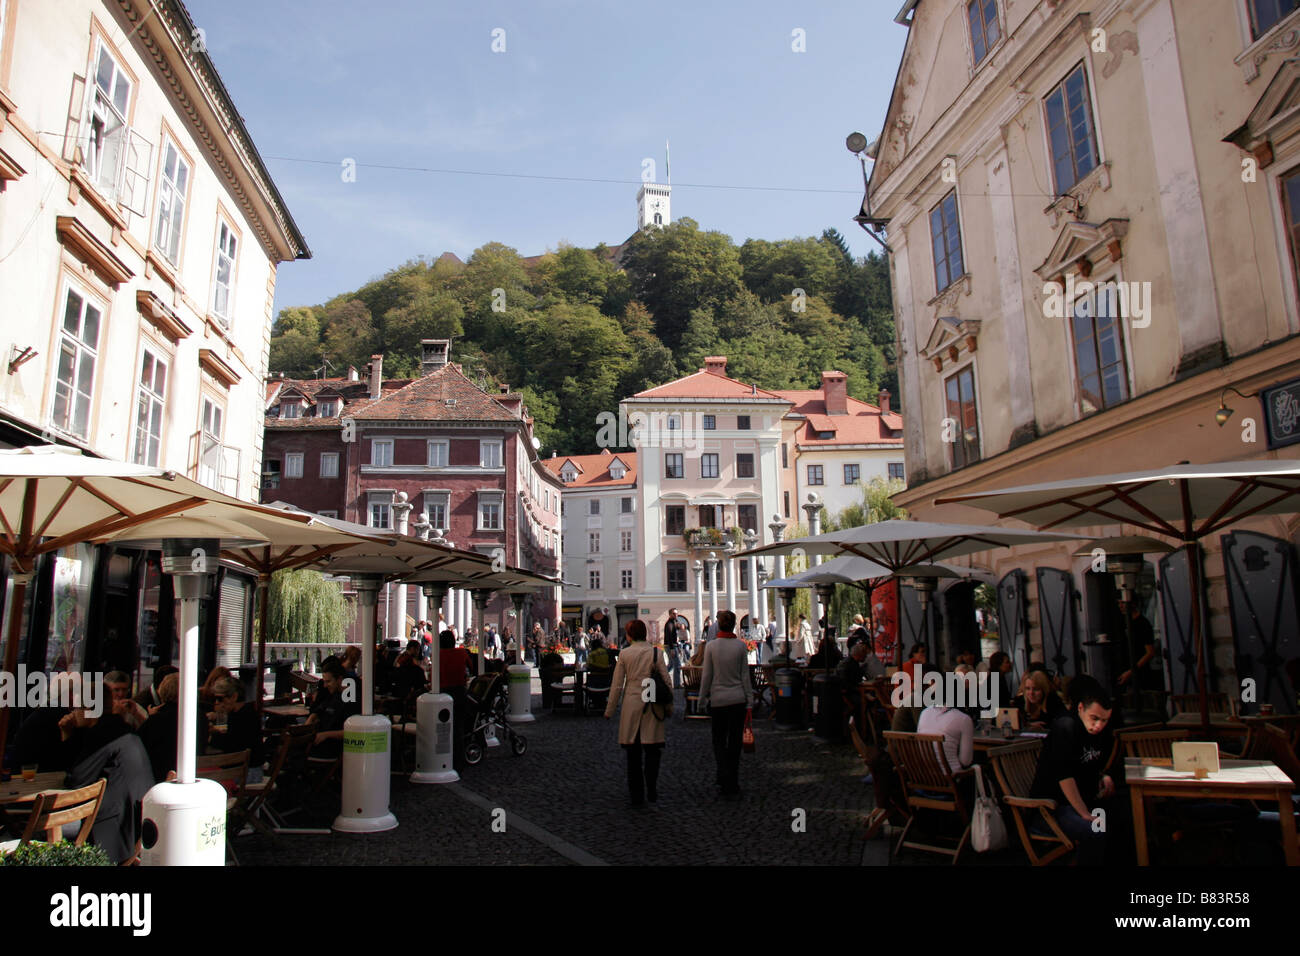 Al-fresco cafes, bars and restaurants line the streets and river bank of the Old Town in Ljubljana, the capital city of Slovenia Stock Photo